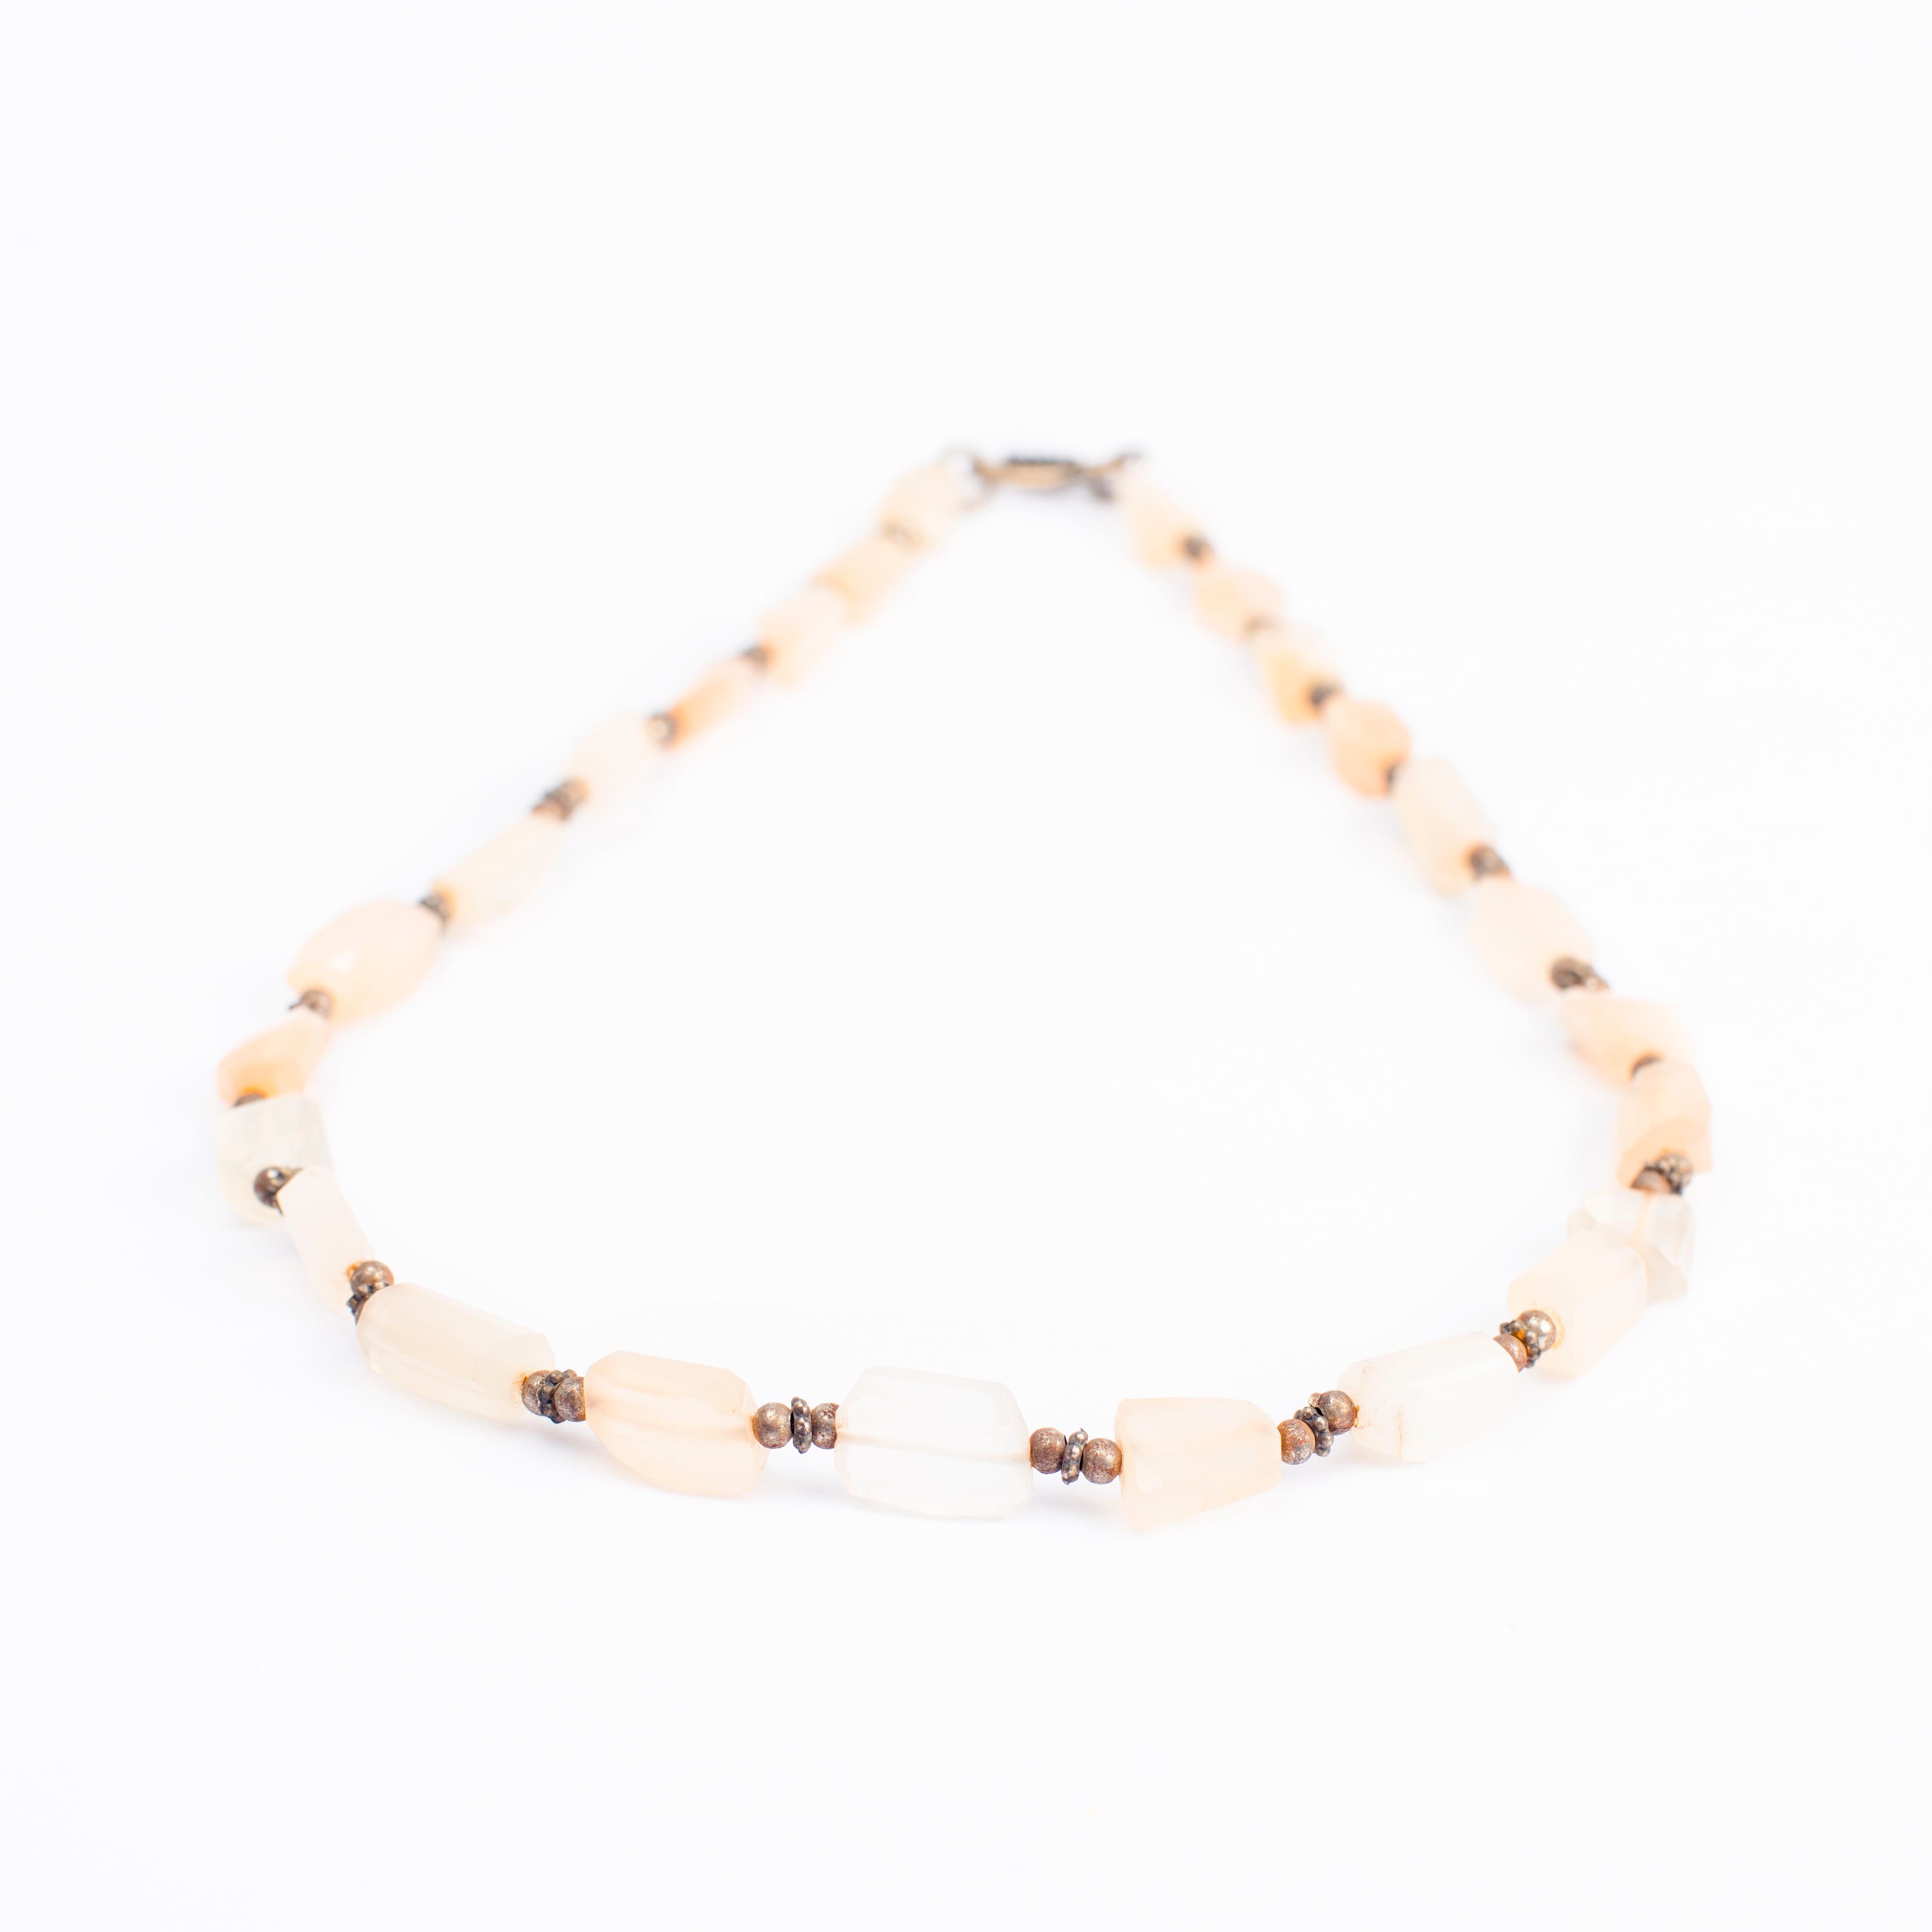 Moonstone with Metal Beads Necklace